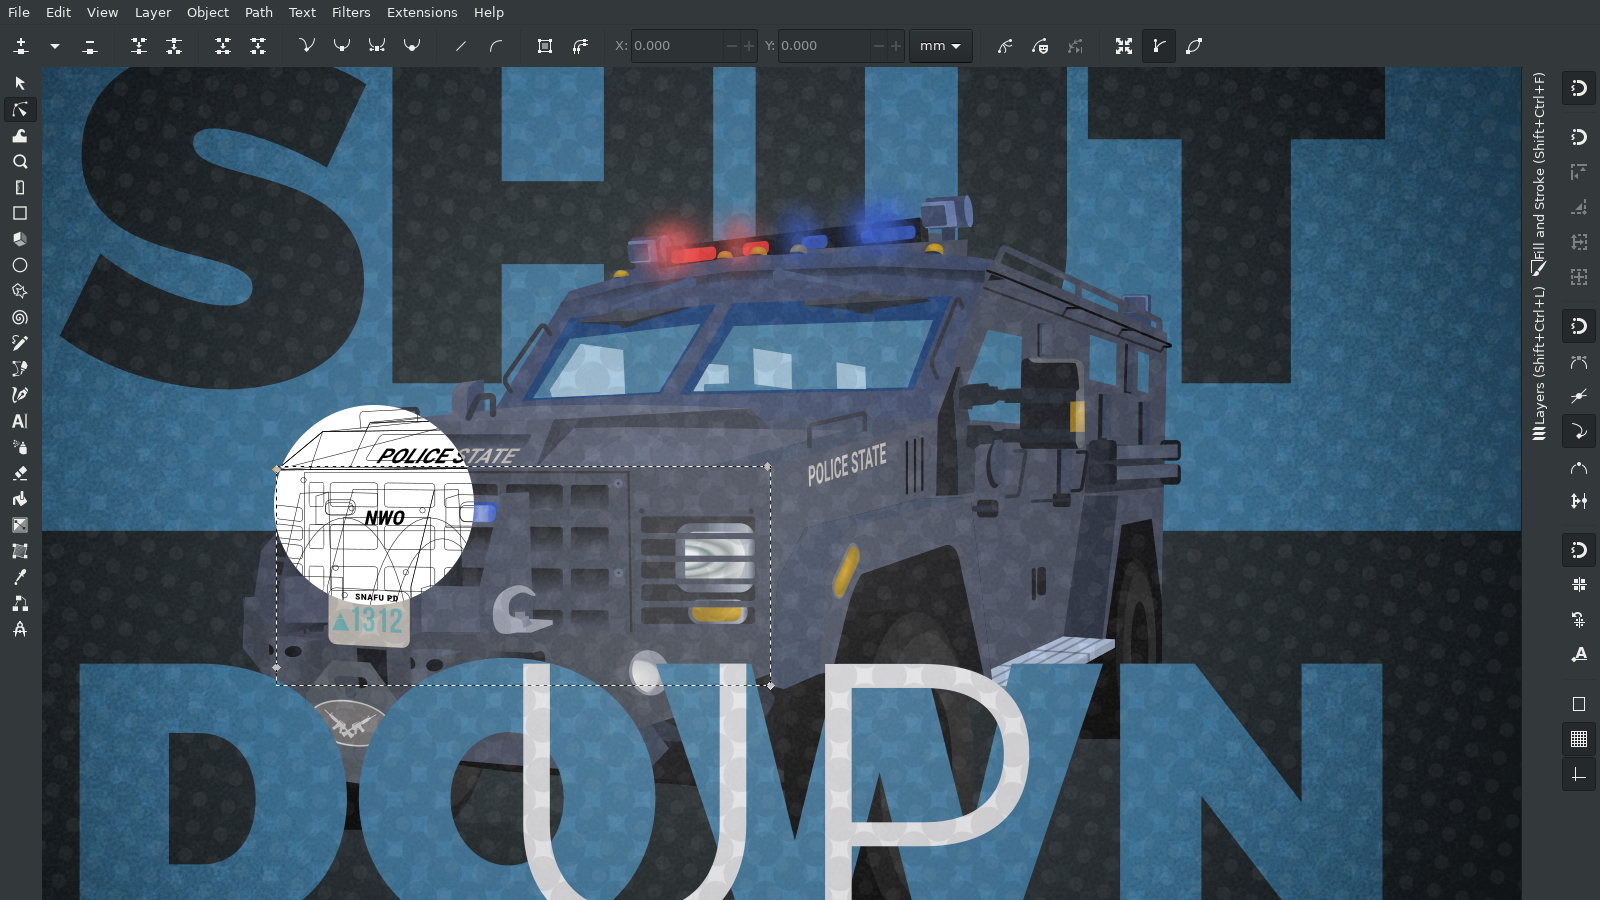 US Police – Bearcat Cars – CGI Visuals – Anti-Riot Vehicles – Pop-Art – Protest – Illustration by gfkDSGN